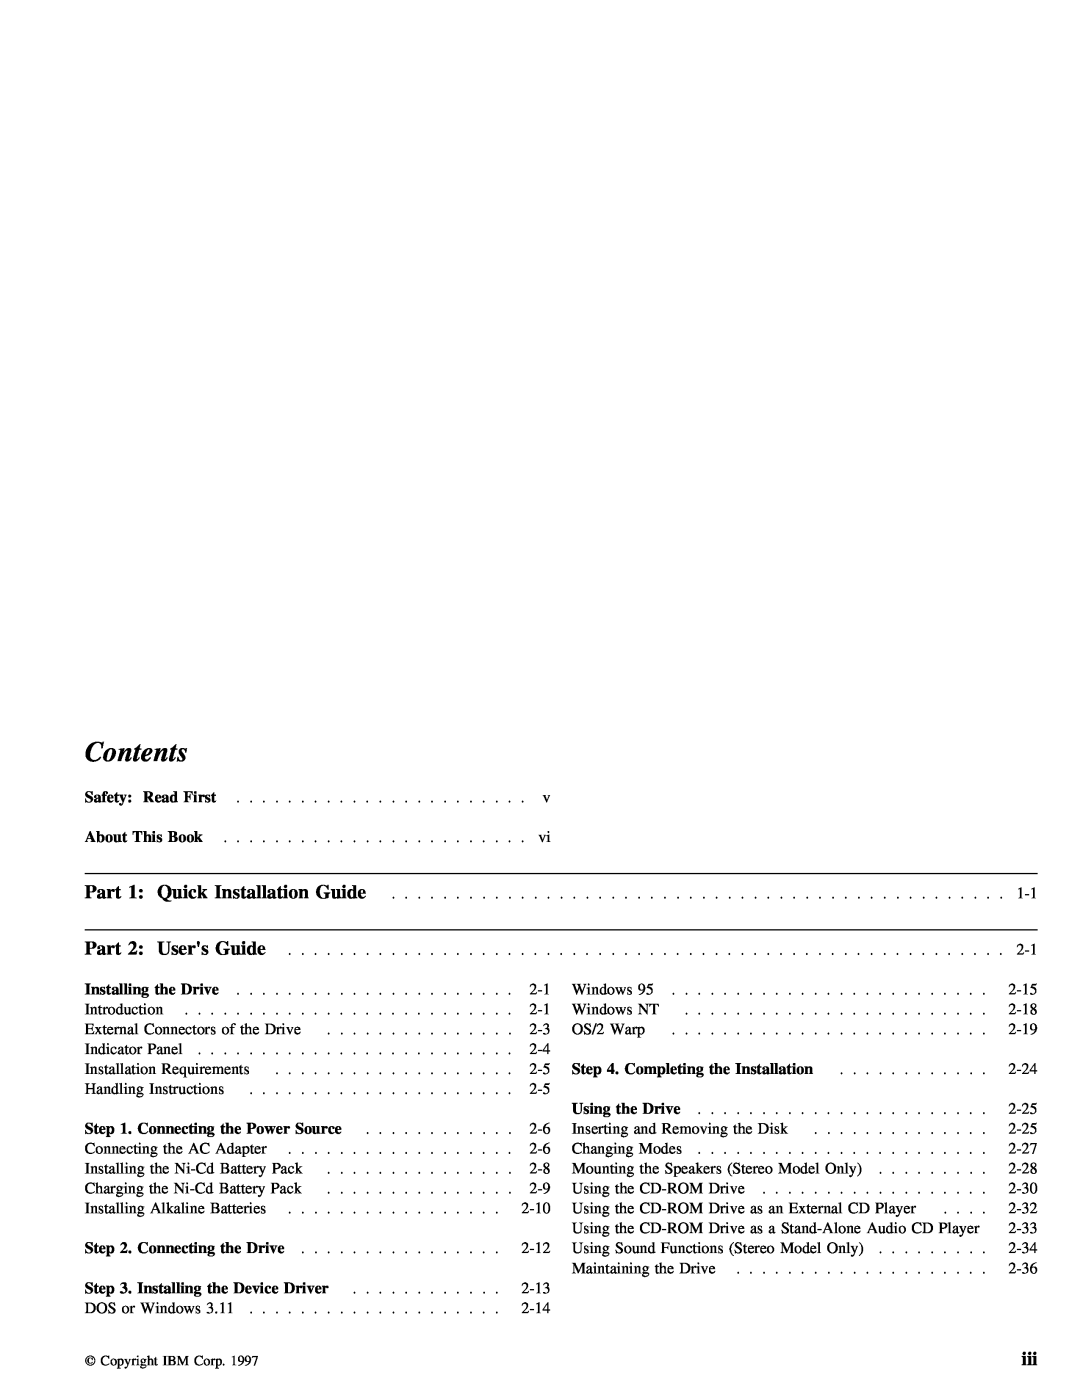 Lenovo 4304493 manual Contents, Part 2 Users Guide, Installation Guide, Read First, Book 